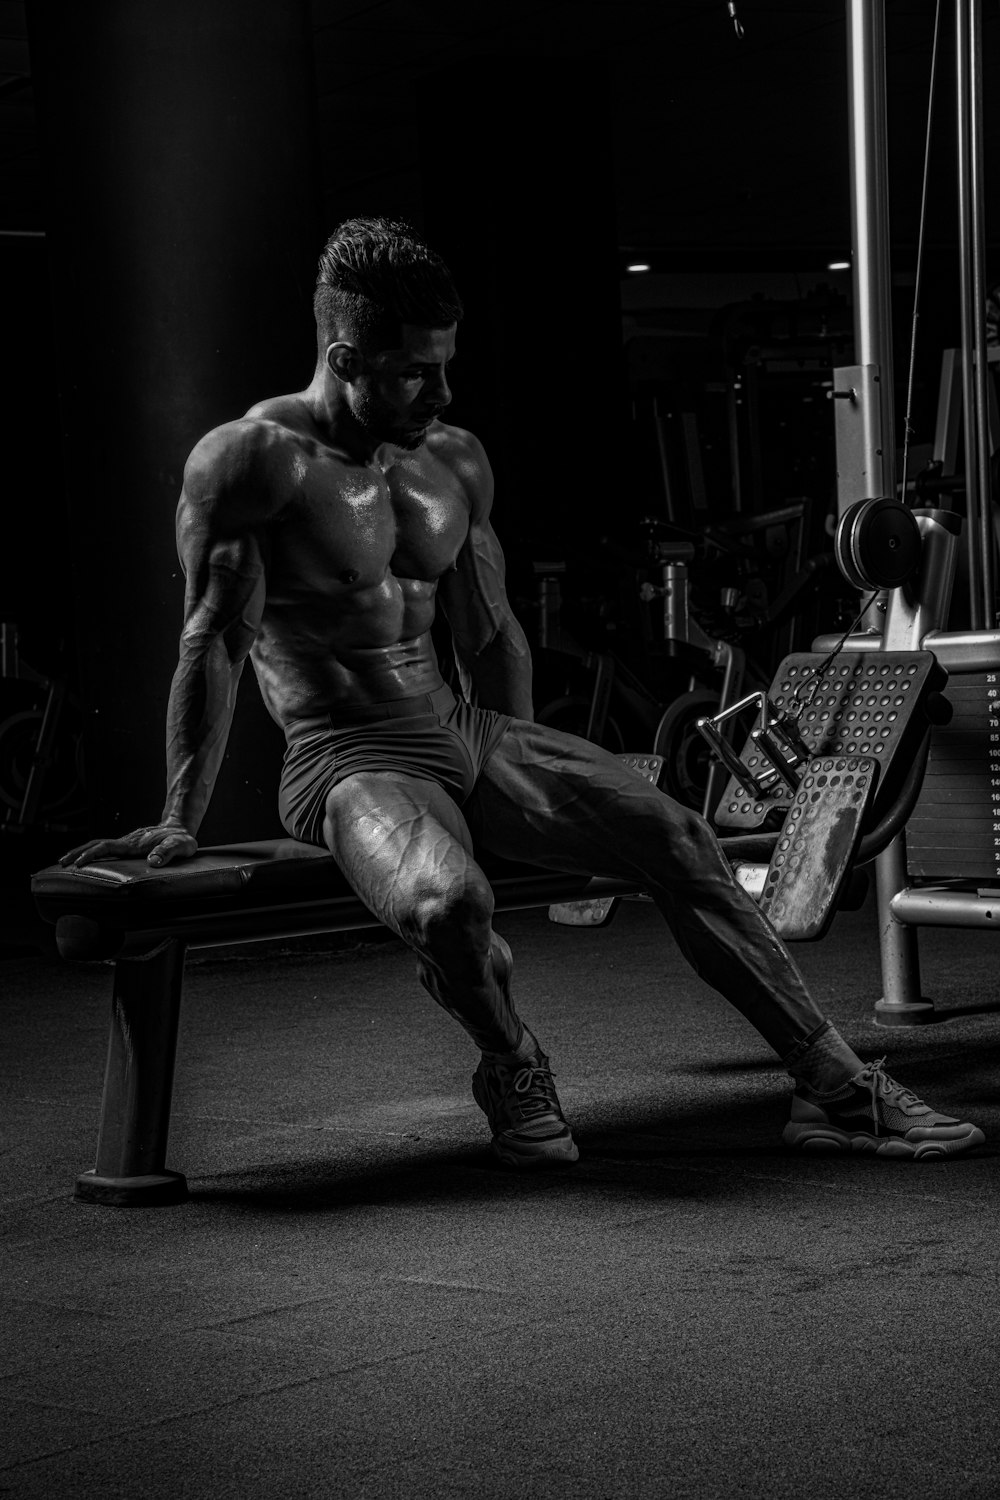 A a Image gym on – Free a Black sitting in man Unsplash photo bench on